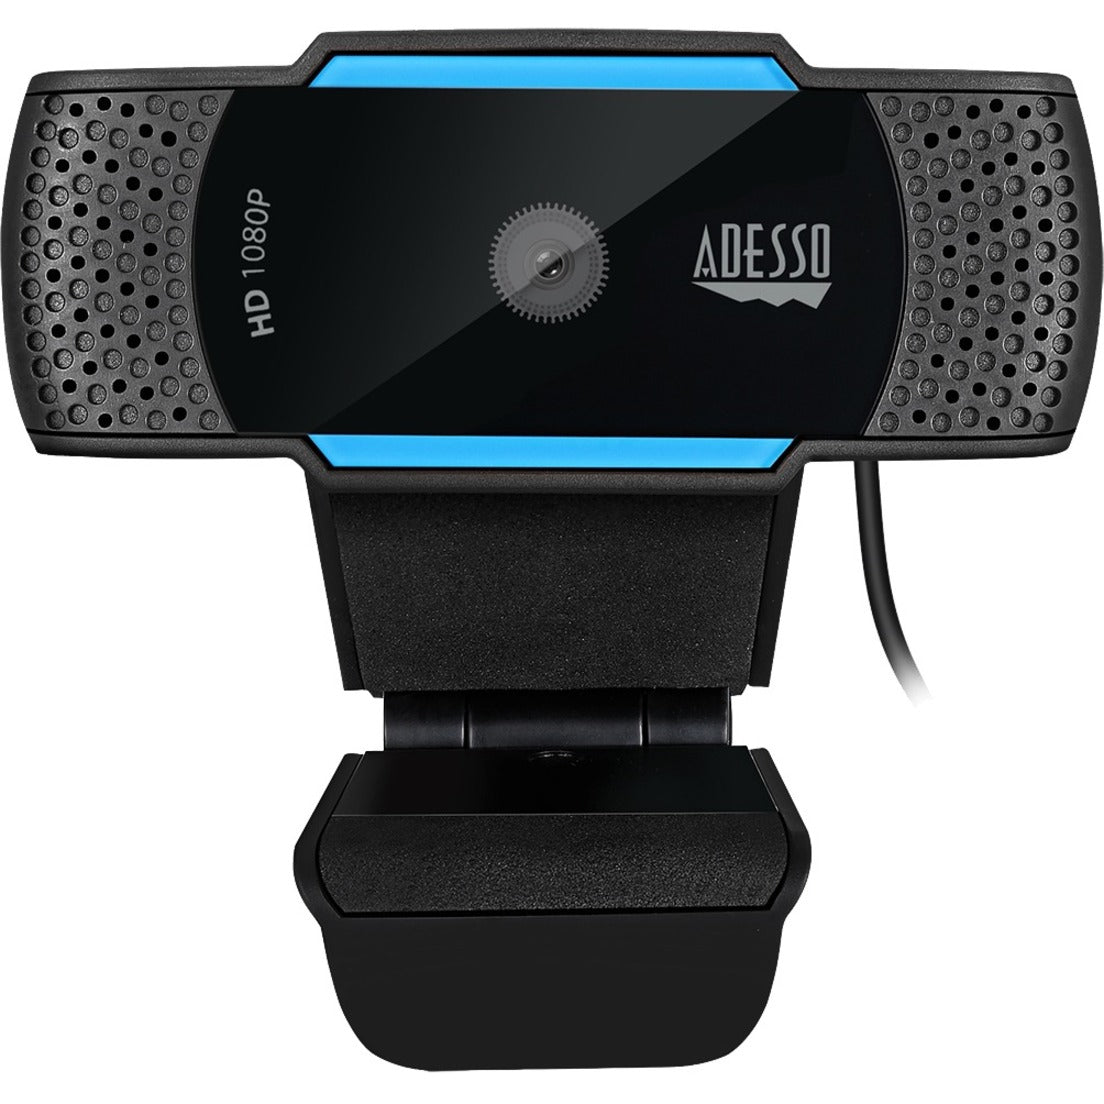 Adesso CYBERTRACKH5 1080P HD H.264 Auto Focus USB Webcam with Built-in Dual Microphone, 2.1 Megapixel, 30 fps